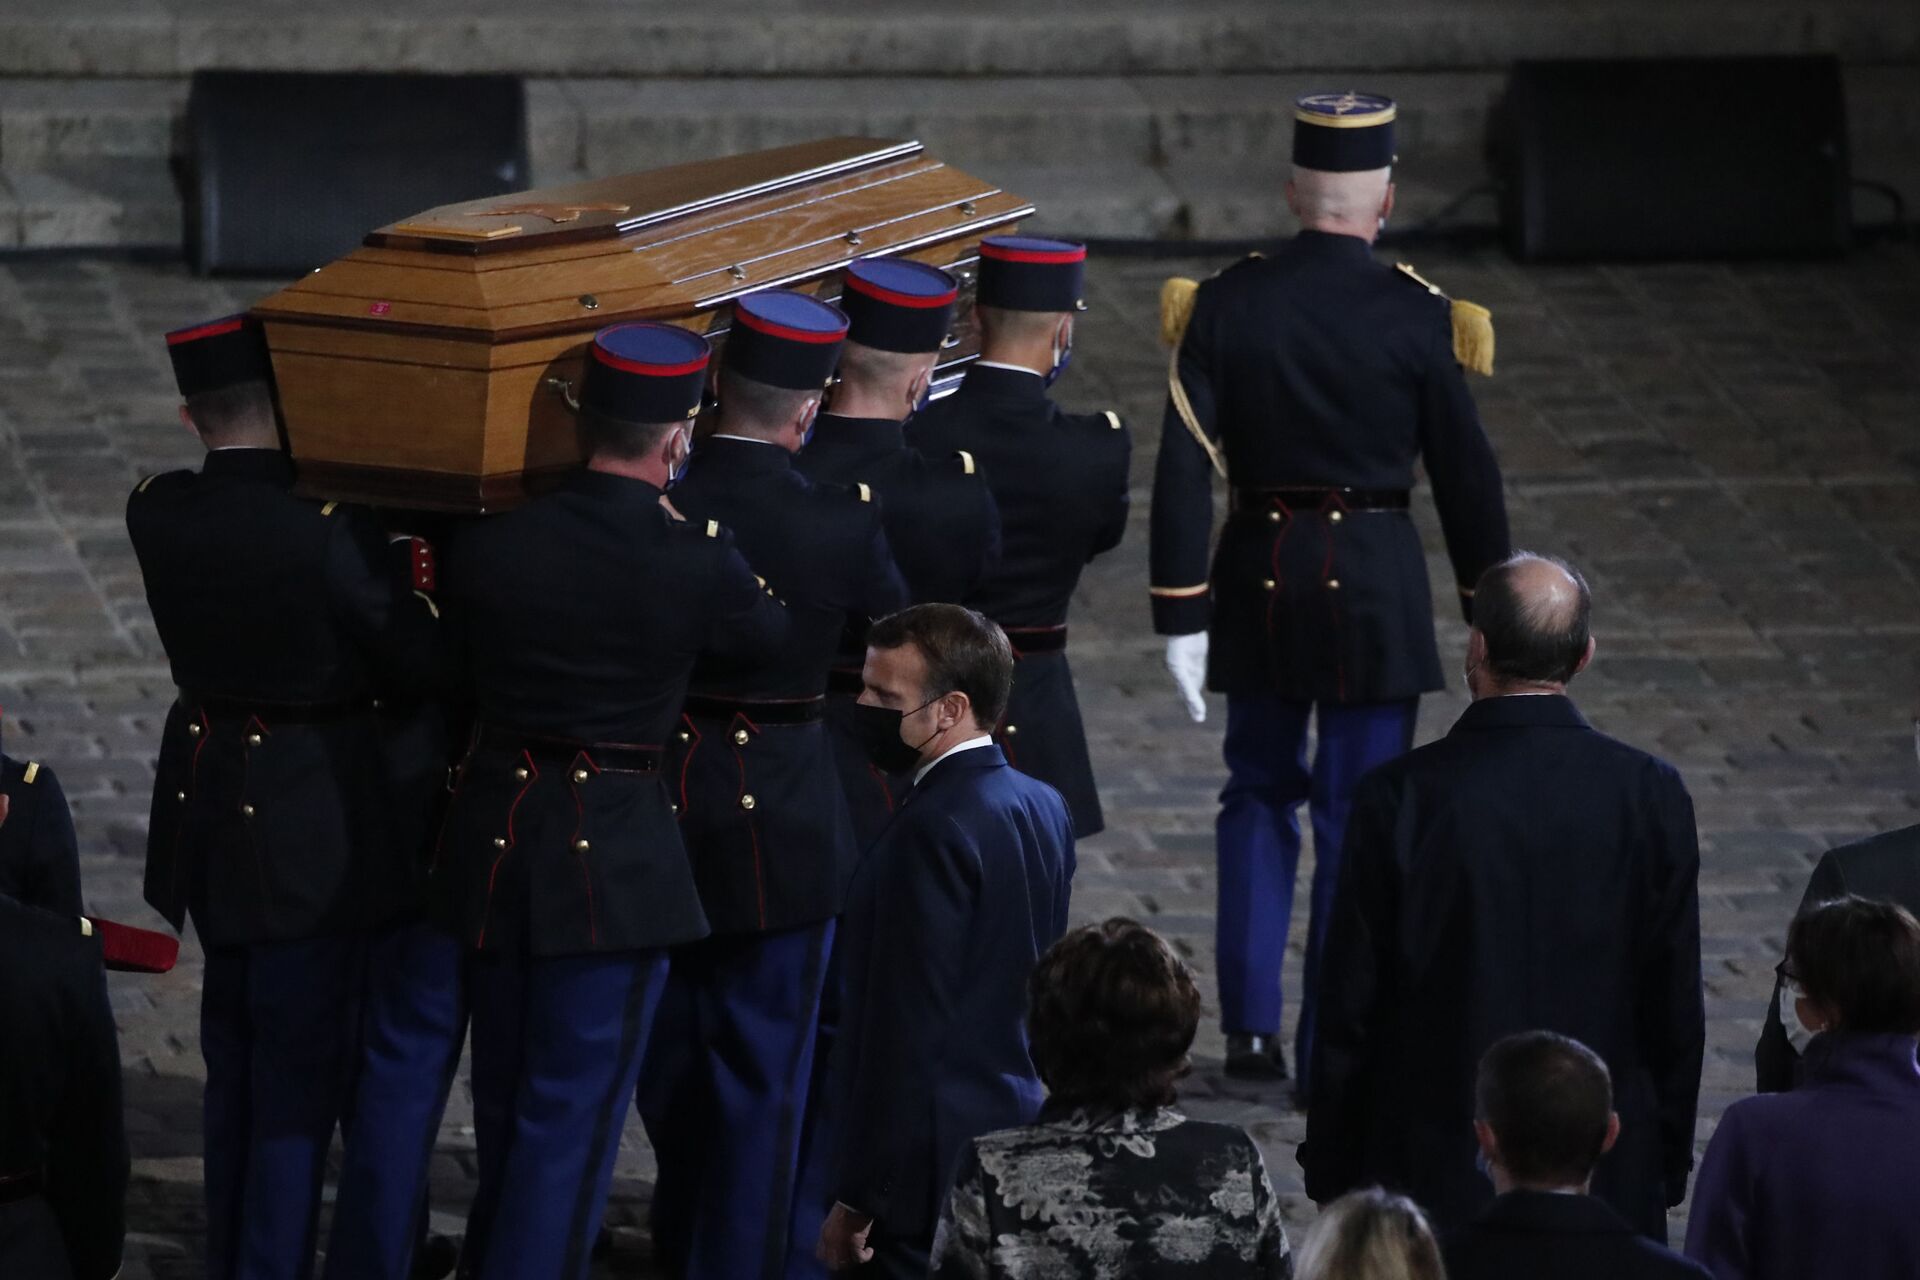 The coffin of slain teacher Samuel Paty is carried in the courtyard of the Sorbonne university during a national memorial event, Wednesday, Oct. 21, 2020 in Paris. - Sputnik International, 1920, 07.09.2021